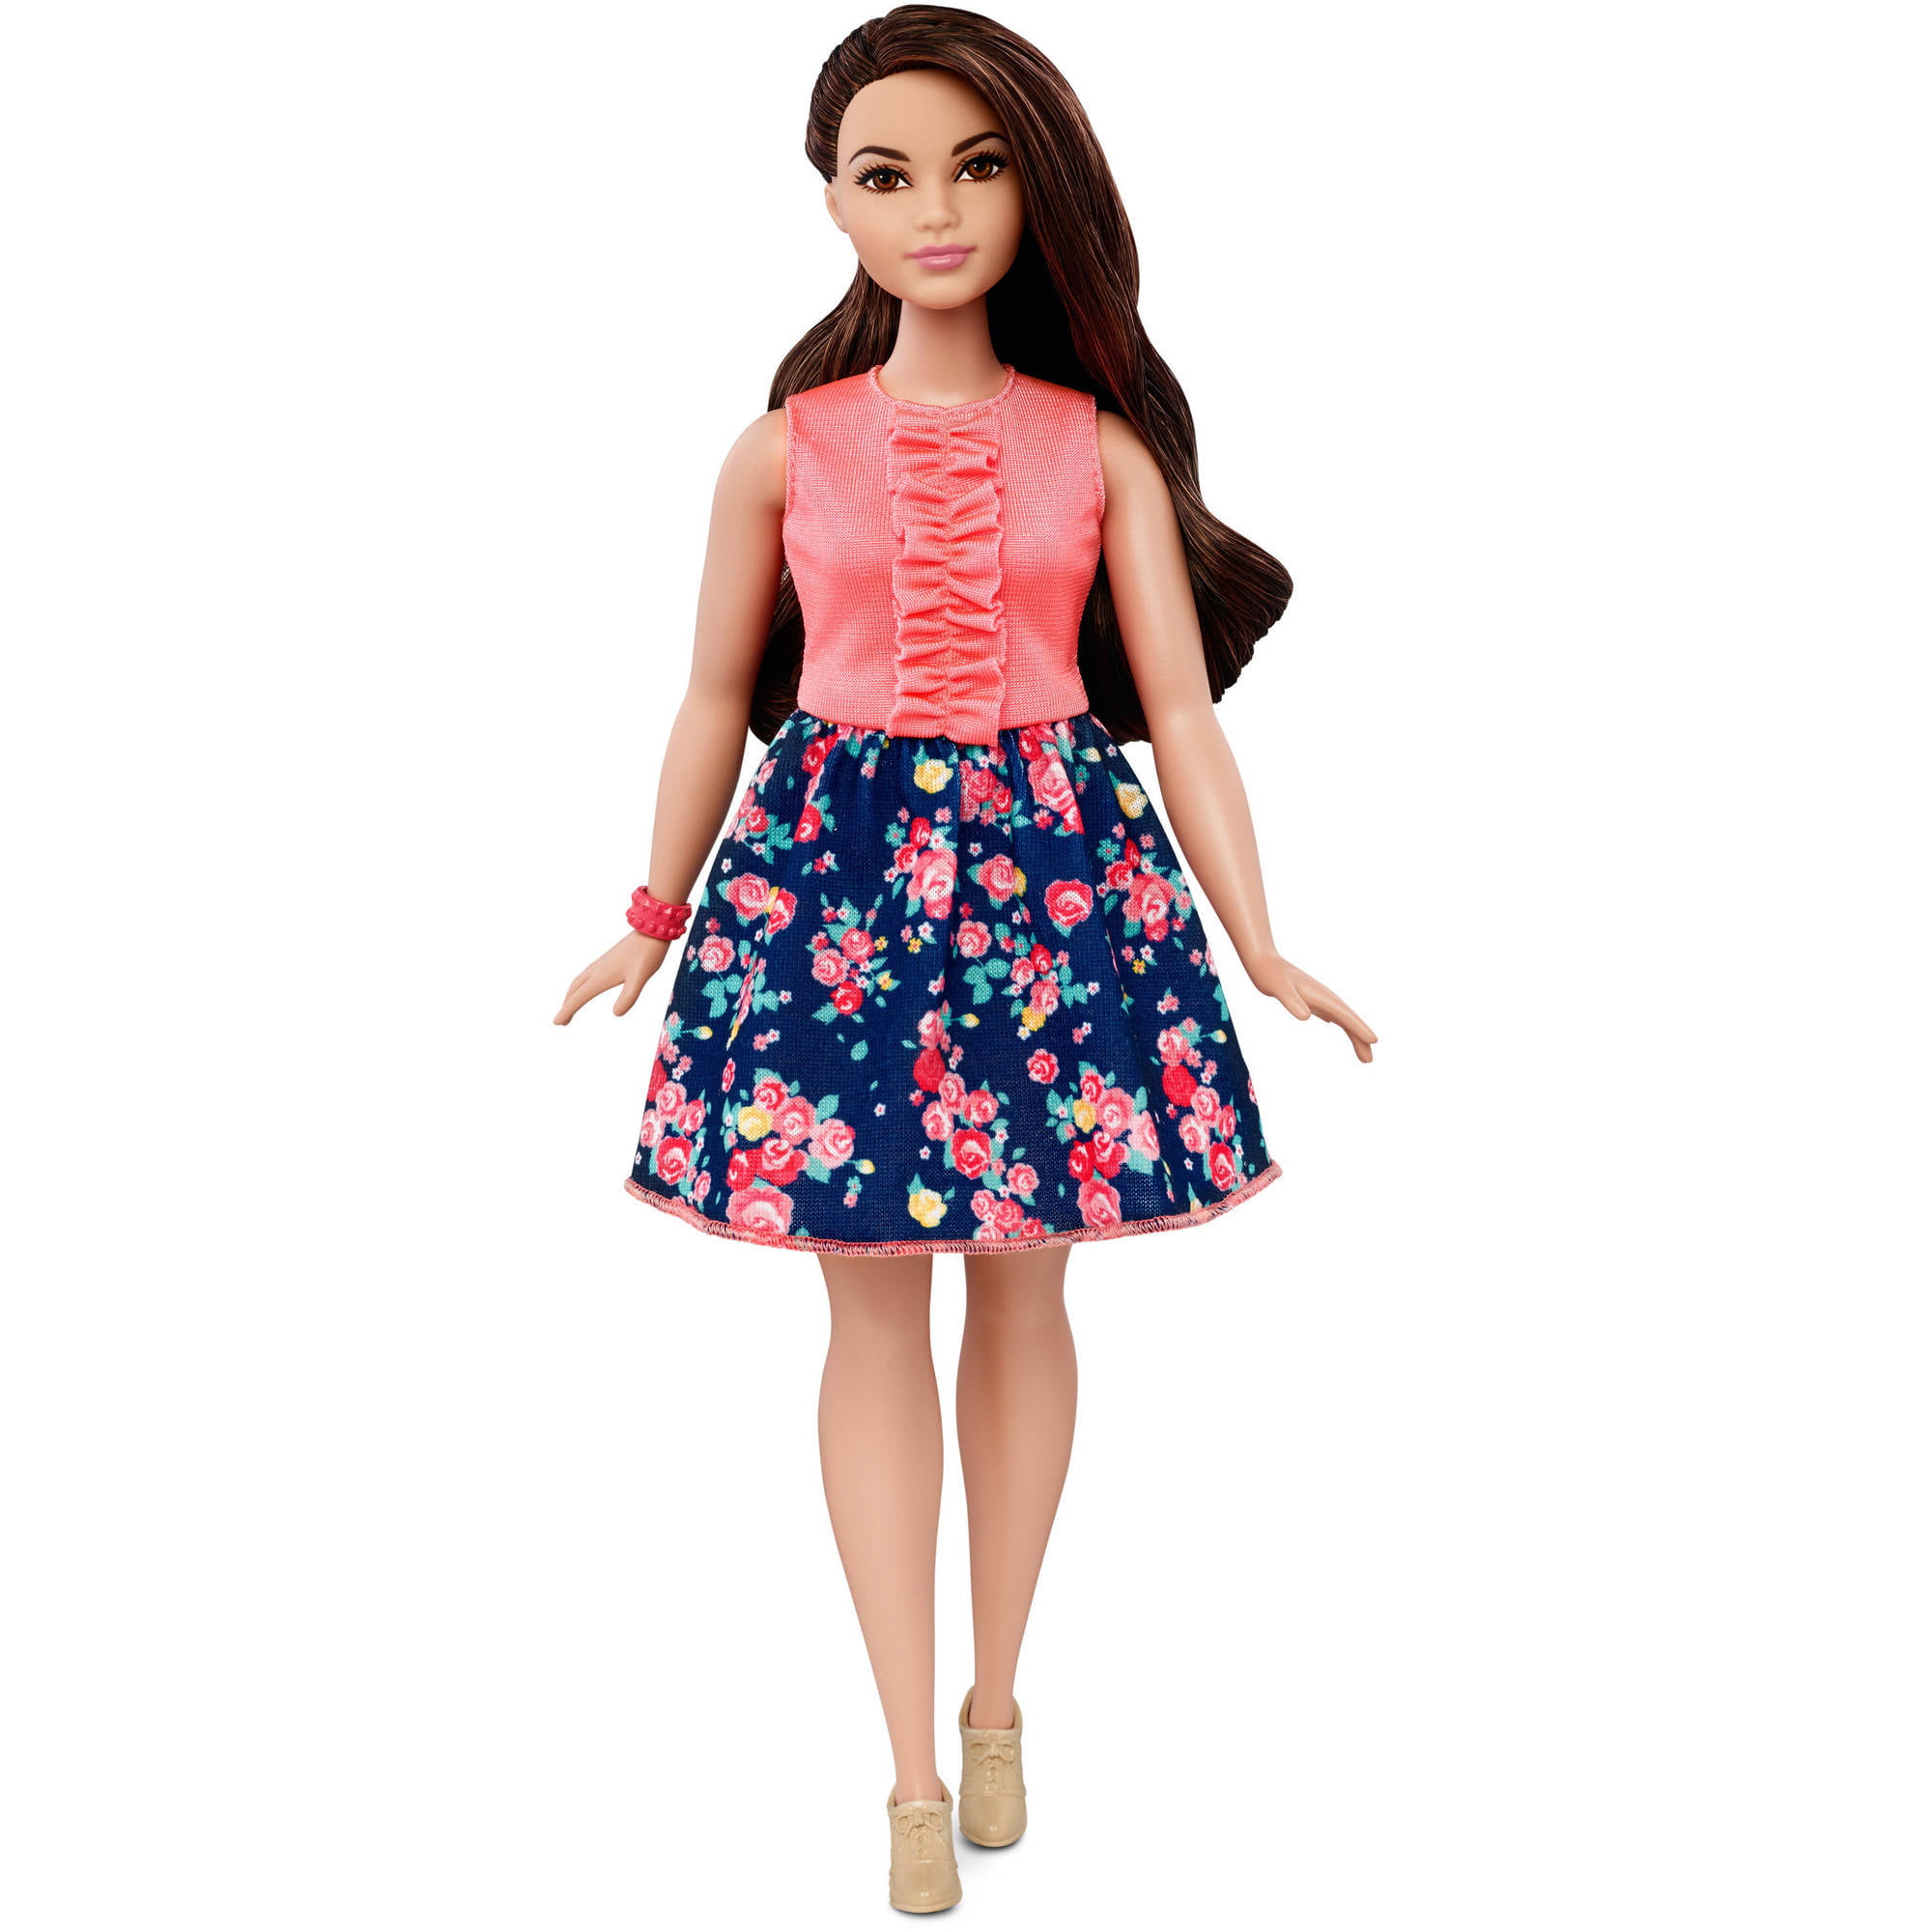 Barbie Fashionistas Doll Curvy Body Type Wearing Floral Romper The Best Porn Website 